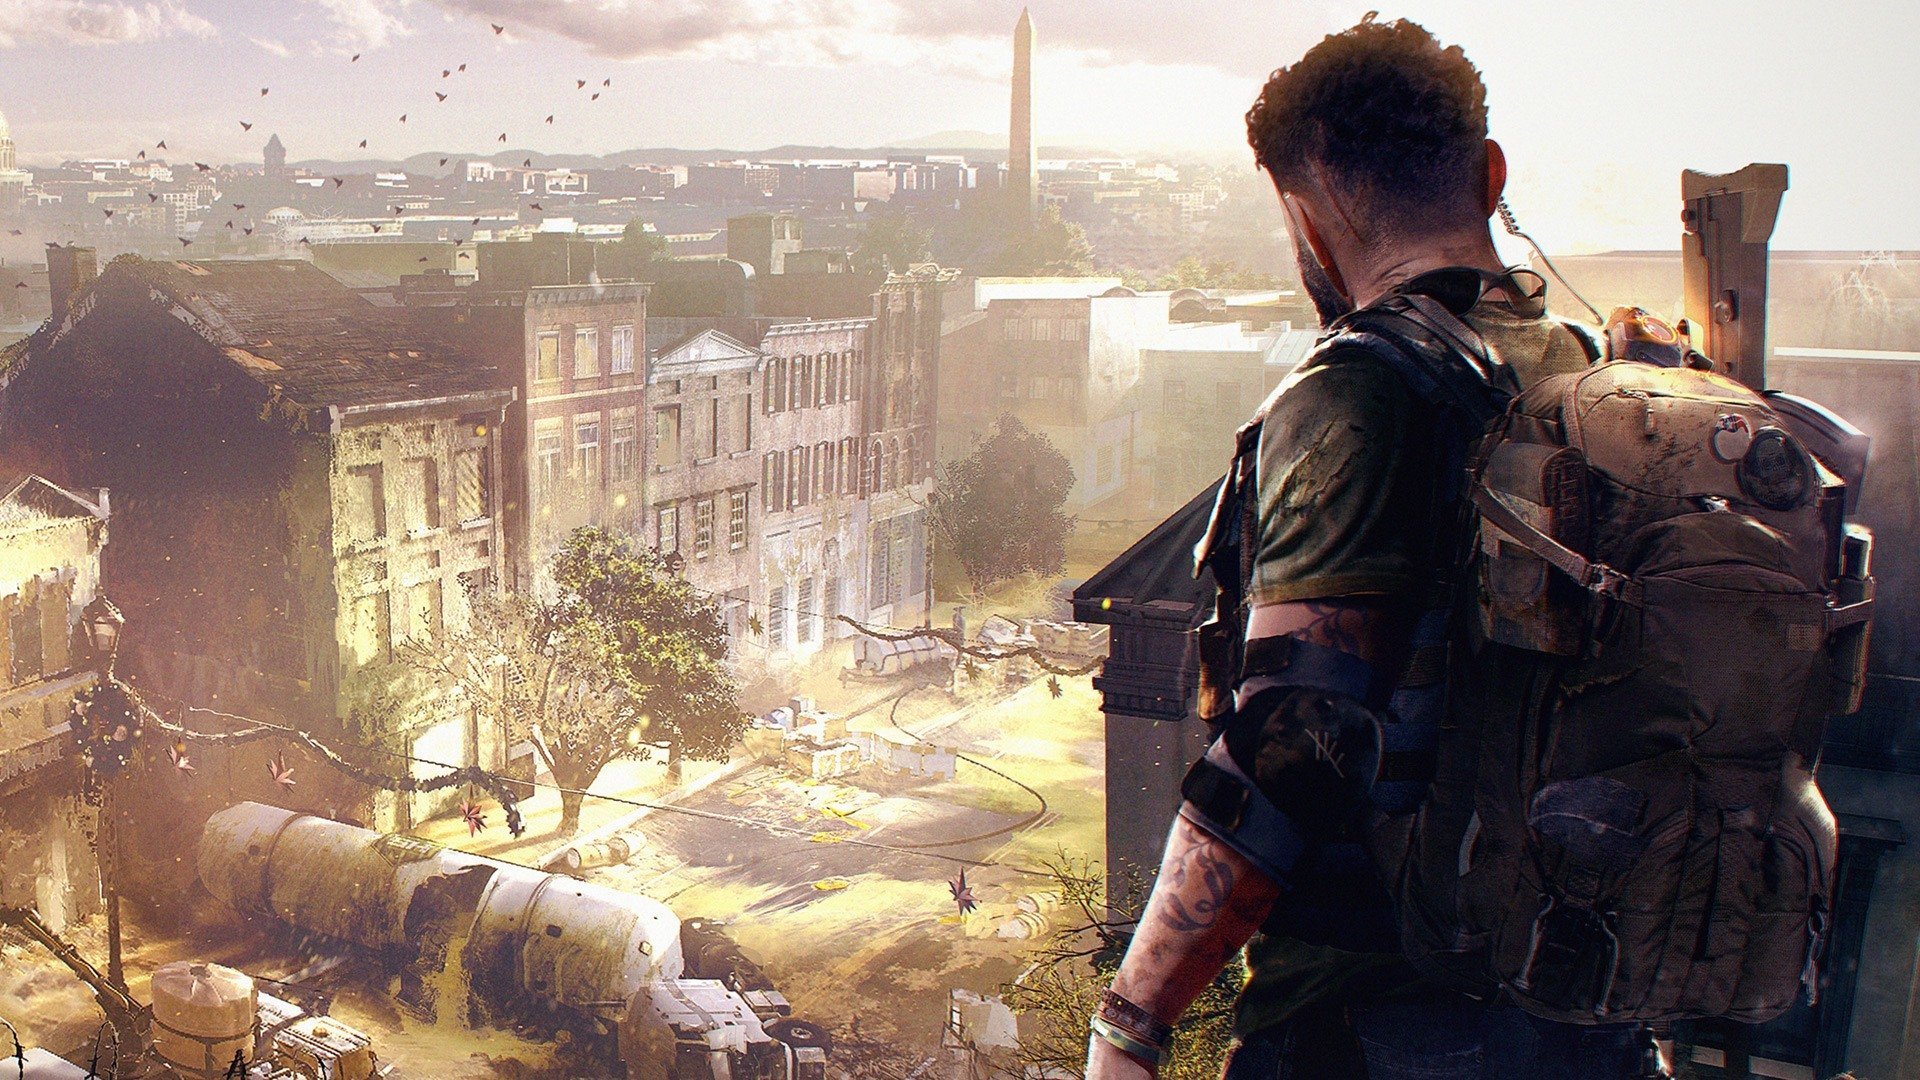 Last best games. Дивижн 2. Tom Clancy s the Division 2. The Division 2 на ПК. Tom Clancy's: the Division 1, 2.